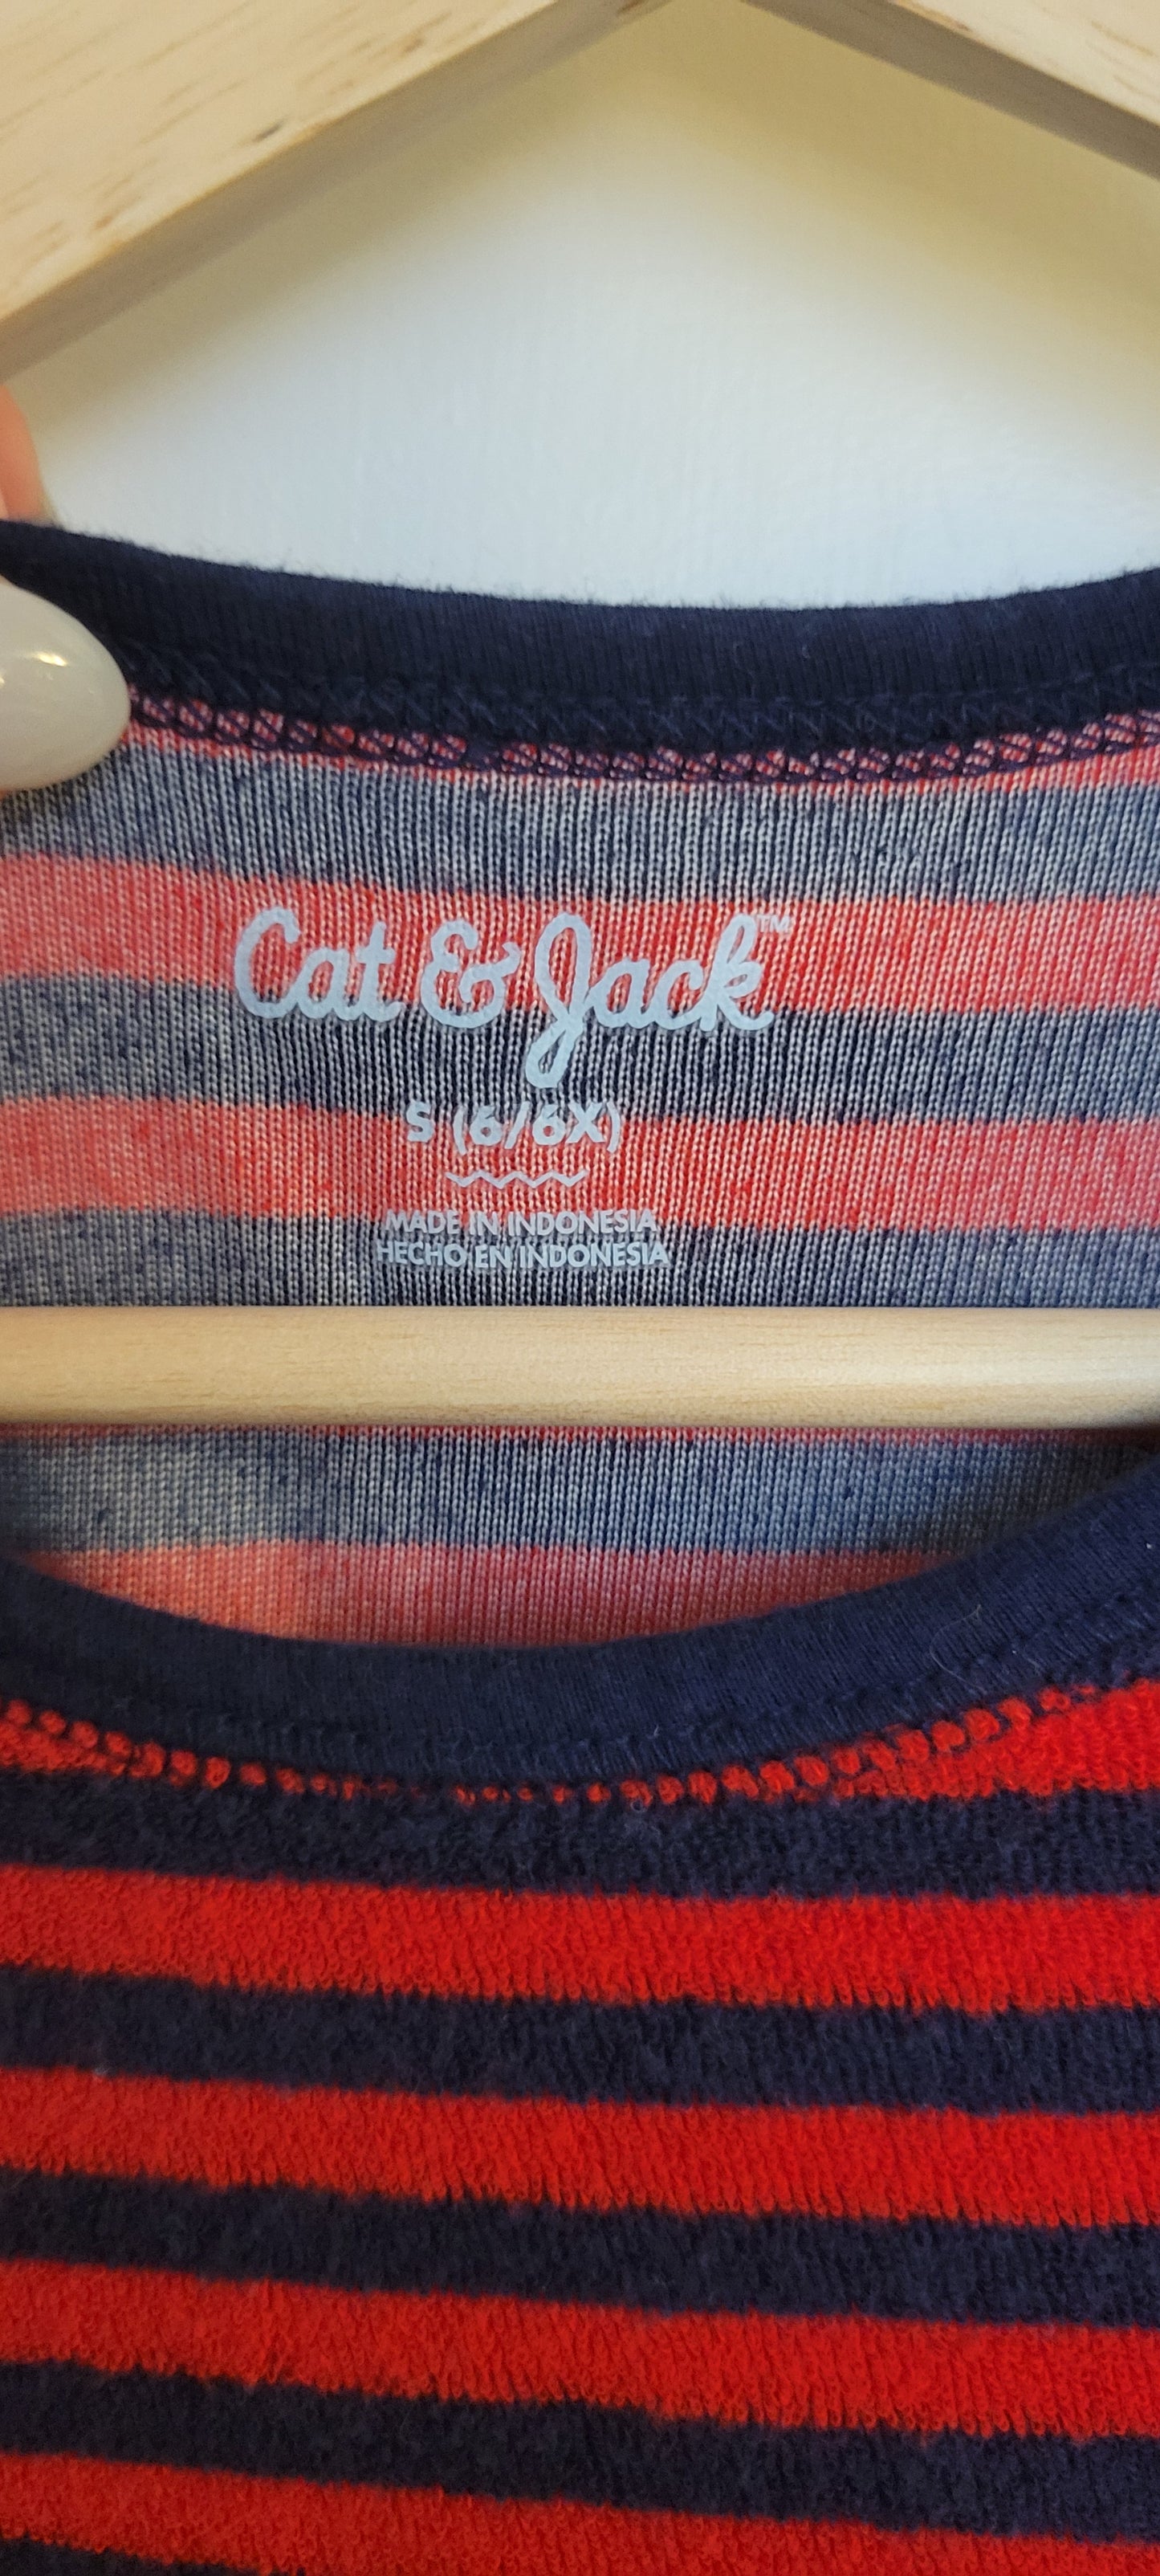 * REDUCED * Cat & Jack Red and Blue Striped Terry Cloth Cover-Up Romper, Size S (6/6X)